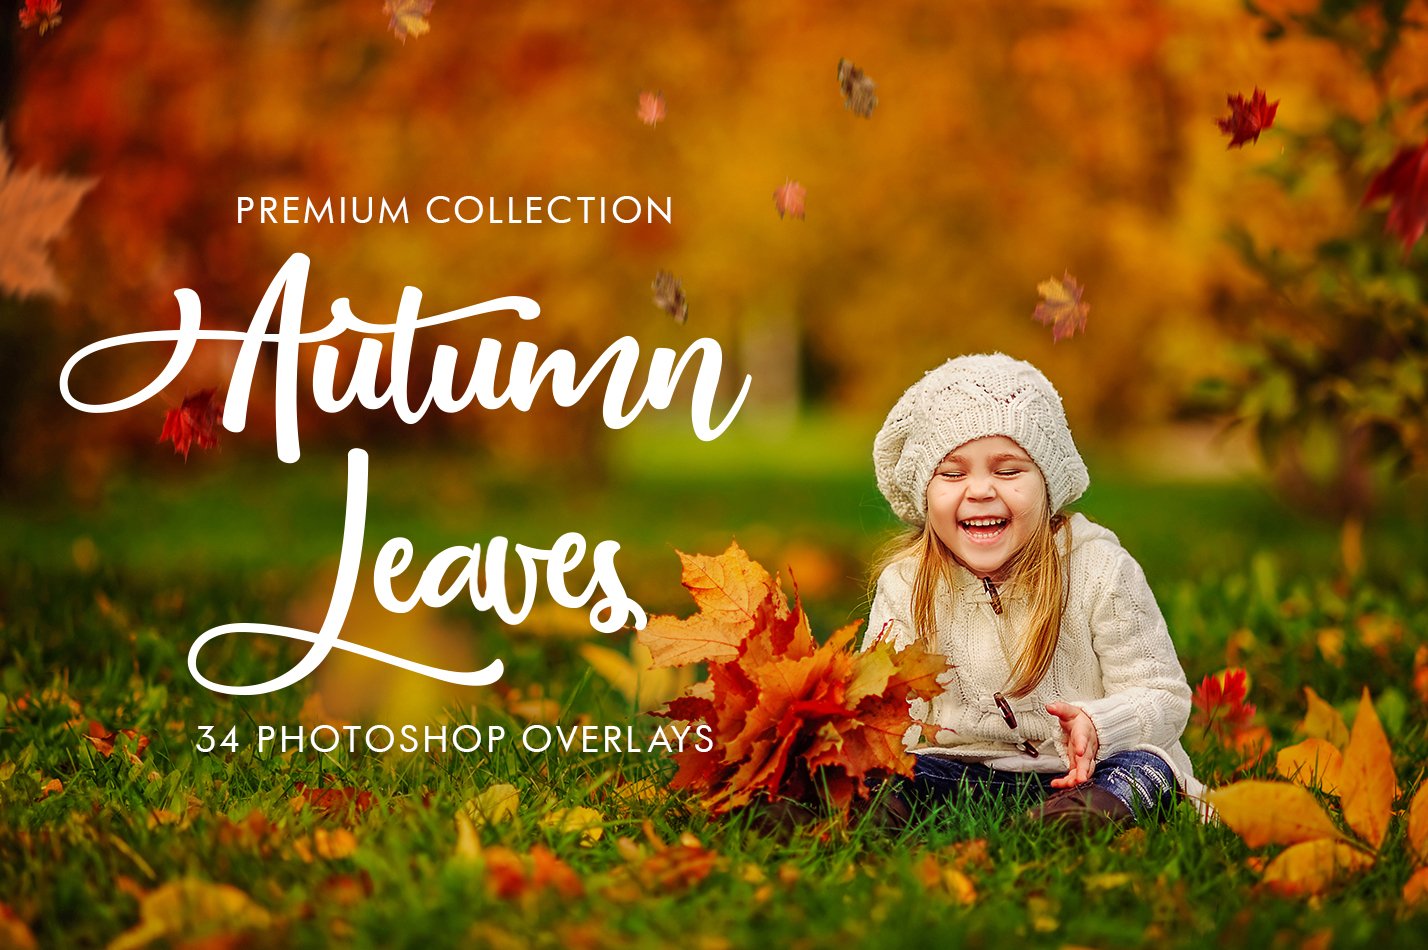 Autumn Leaves Photoshop Overlayscover image.